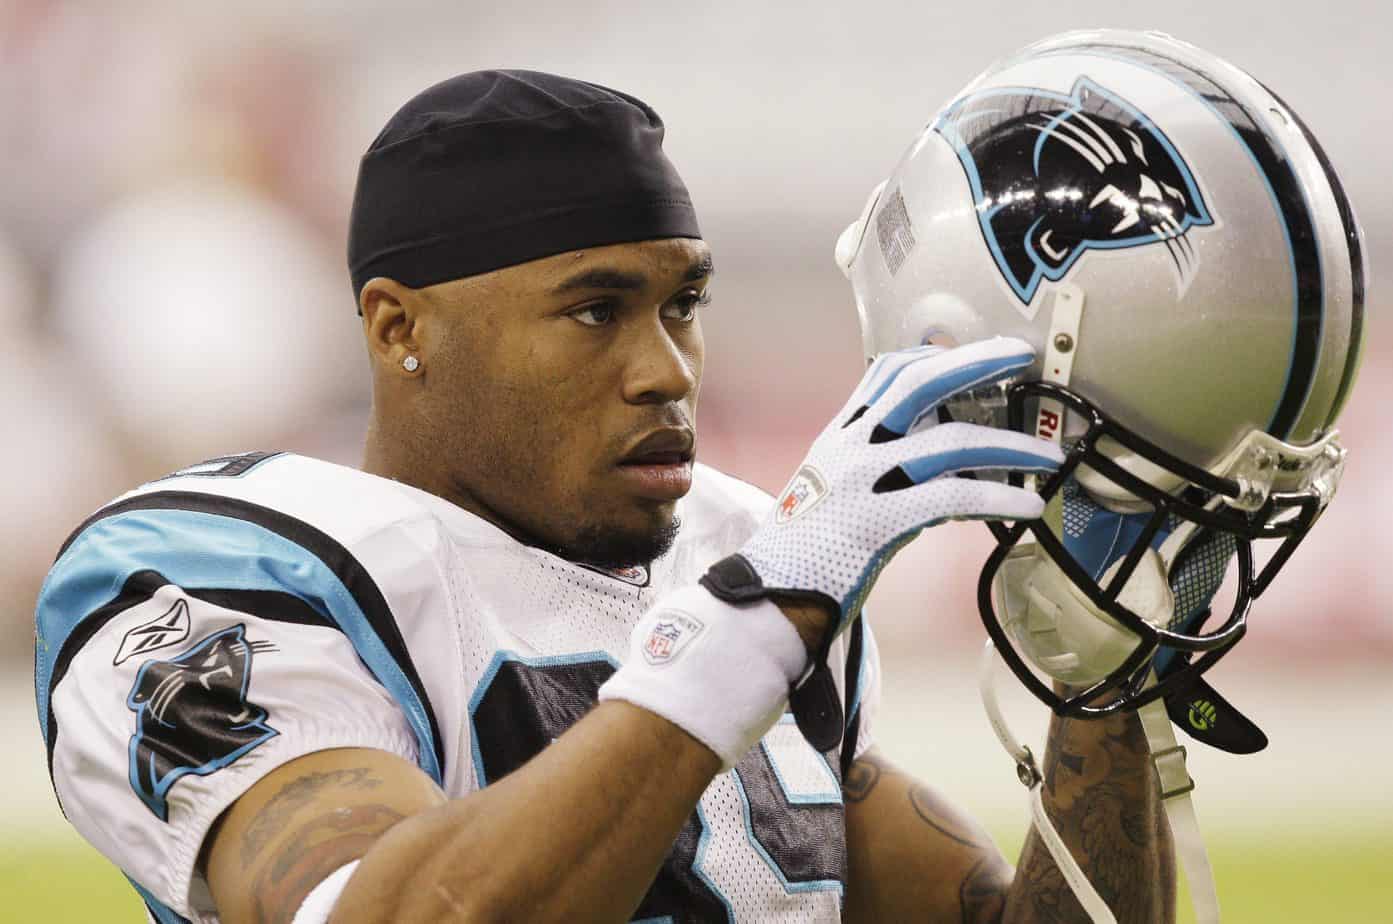 Steve Smith became enraged when a Philly fan threw water at him during the ThursdayNight Football pregame show